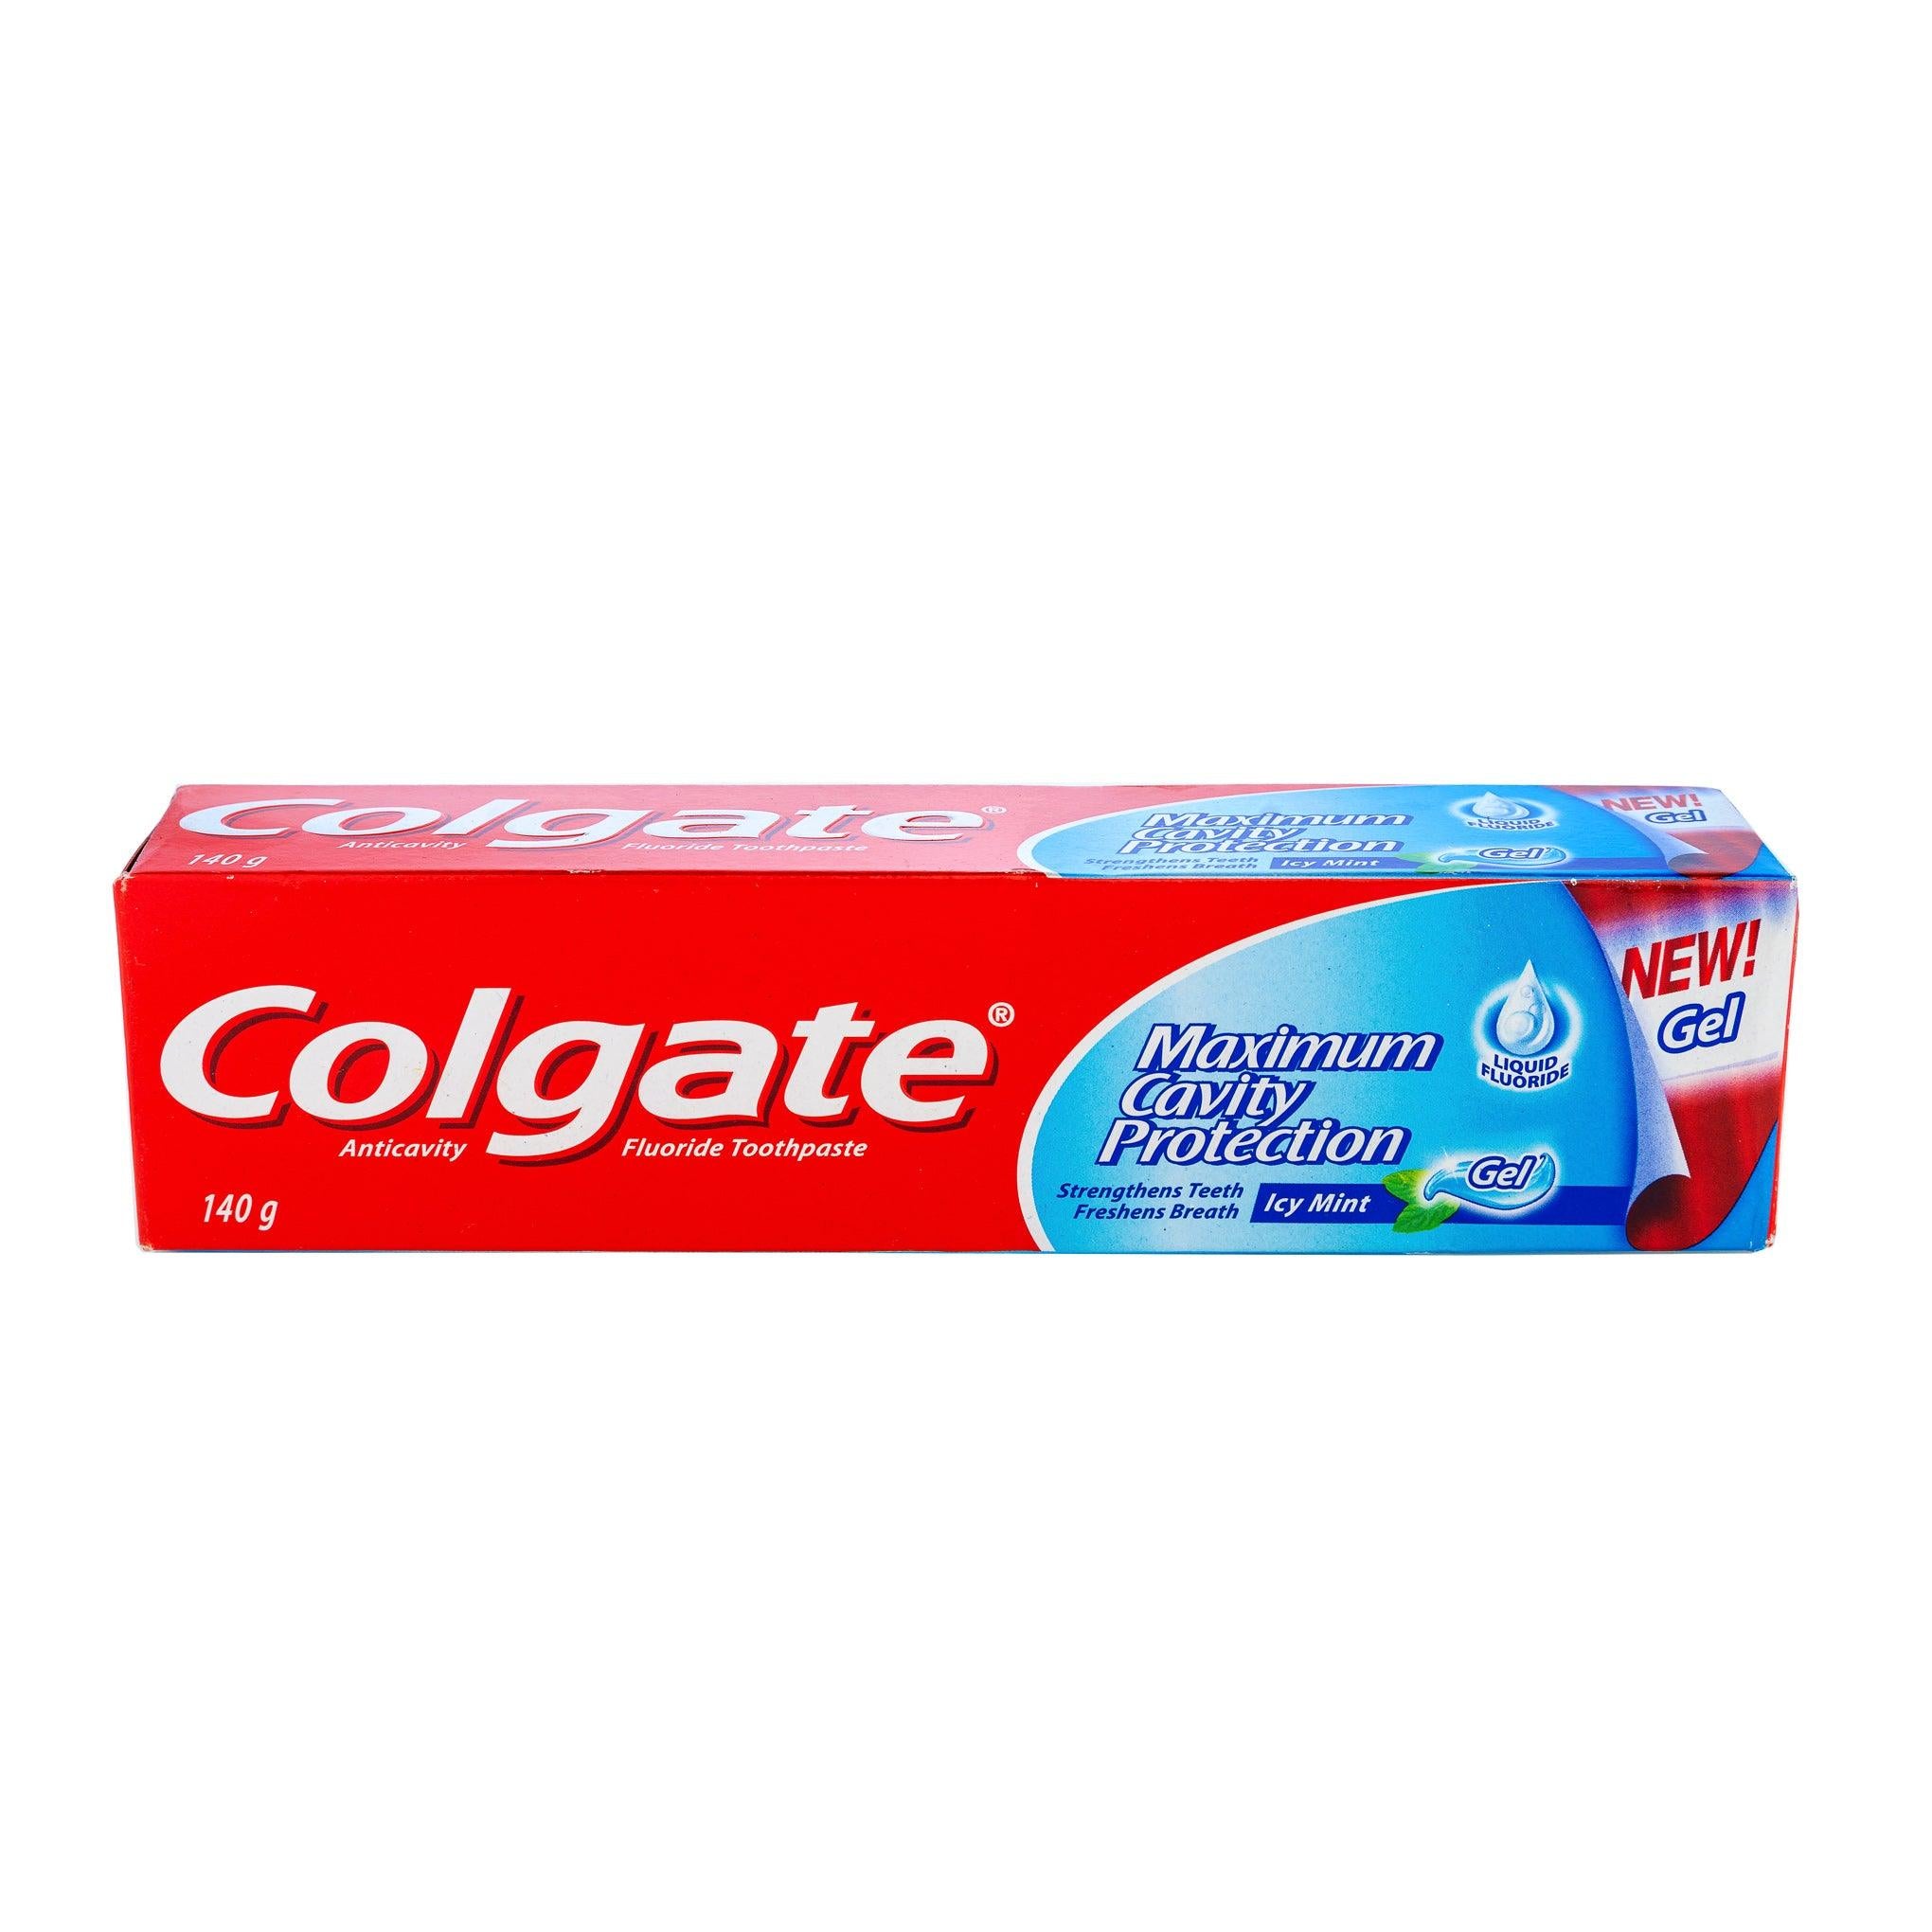 shop Colgate Maximum Cavity Toothpaste 140g from HealthPlus online pharmacy in Nigeria